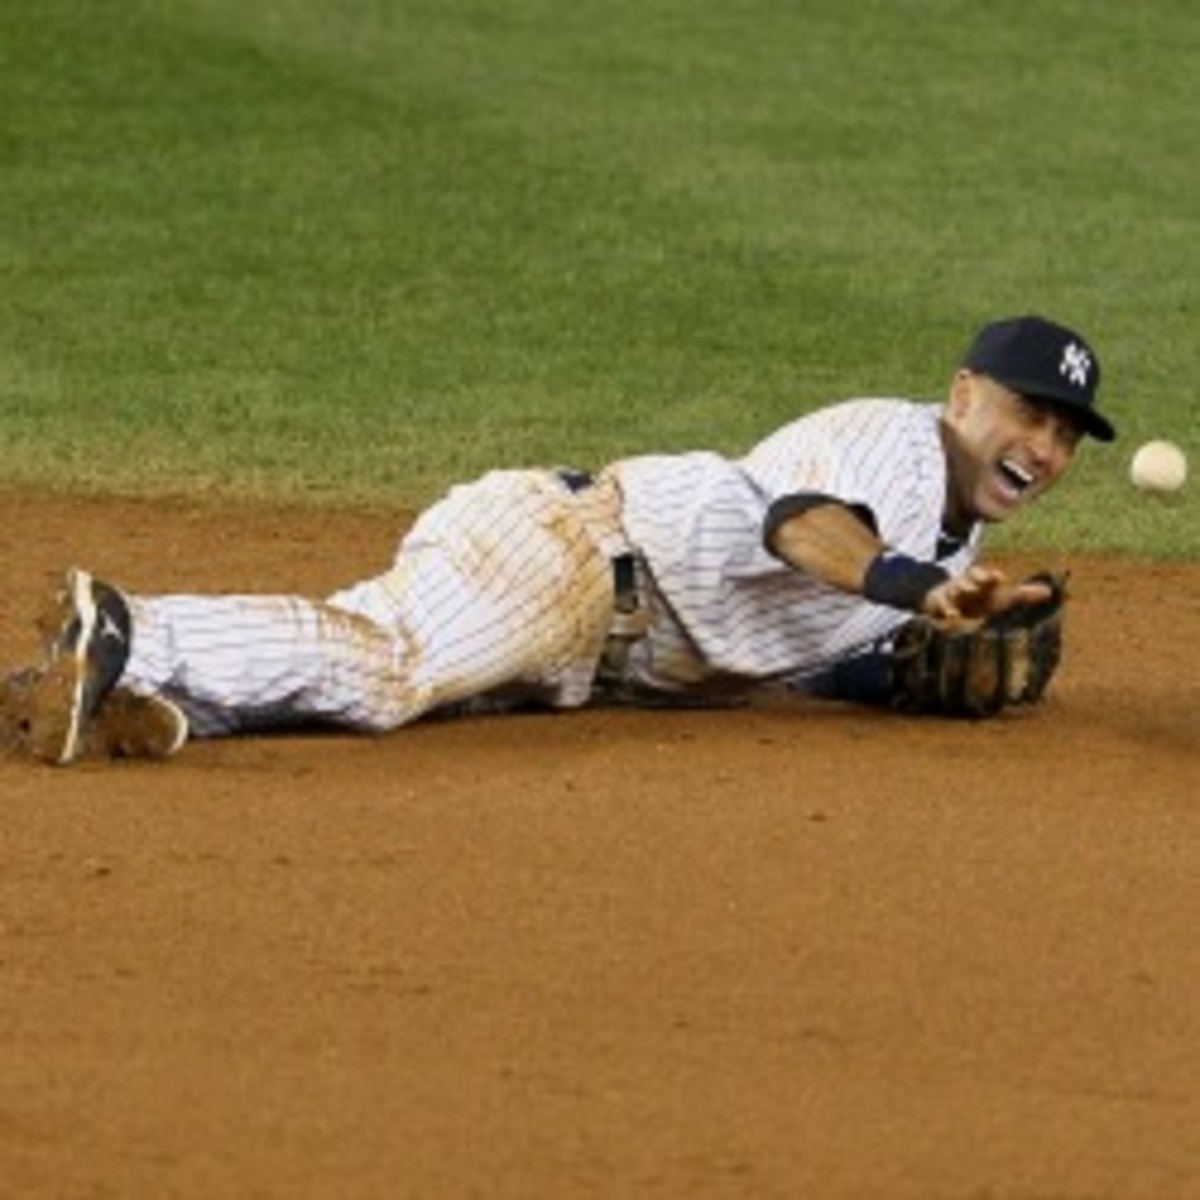 Derek Jeter fractured his left ankle on Oct. 7 during Game 1 of the ALCS. (Alex Trautwig/Getty Images)